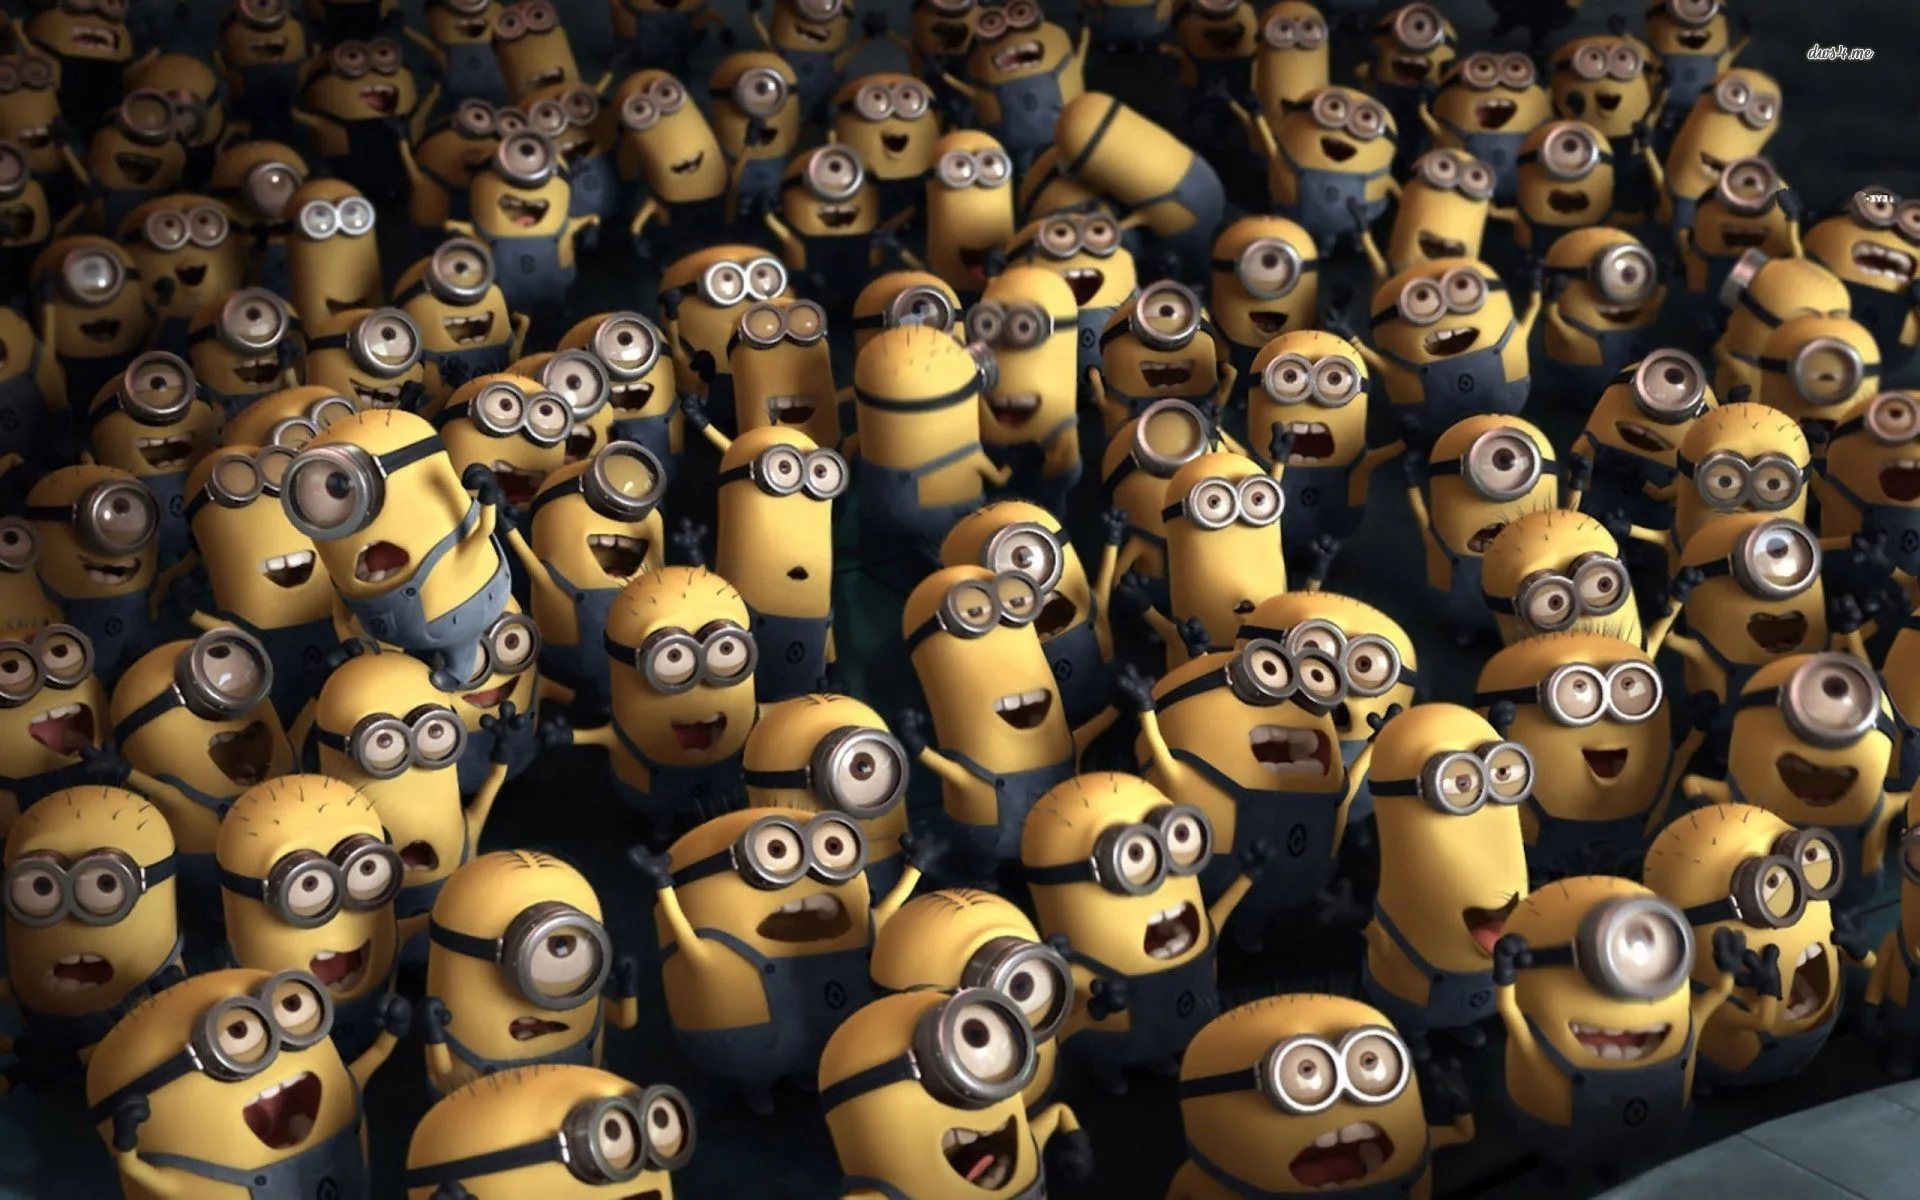 25 Cutest Despicable Me 2 Wallpapers for Windows 8